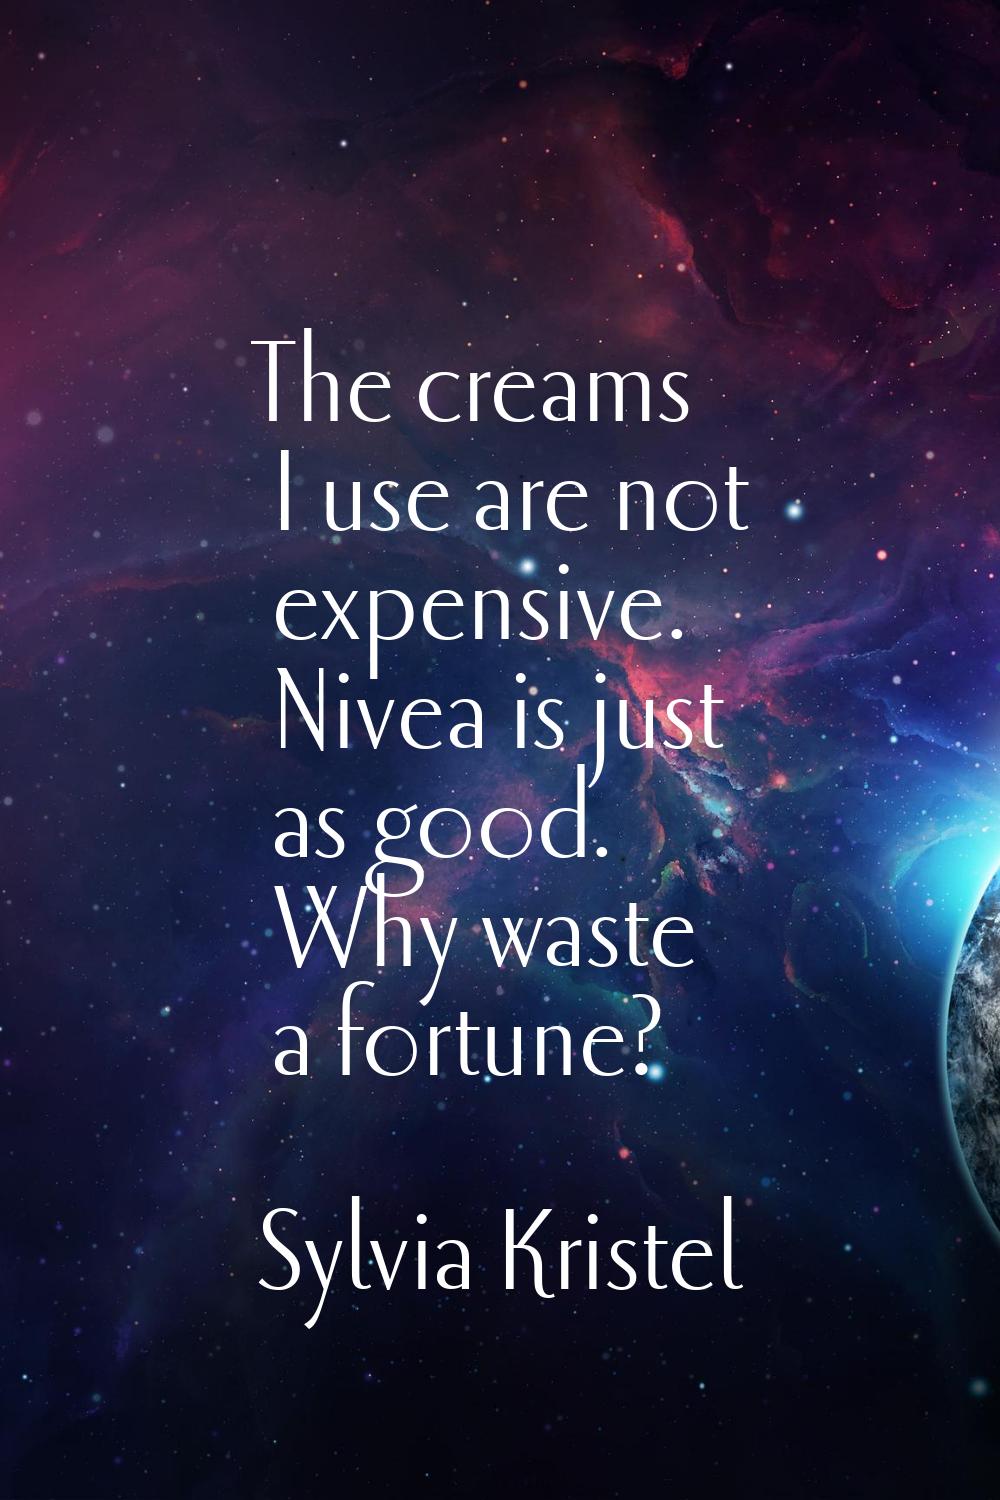 The creams I use are not expensive. Nivea is just as good. Why waste a fortune?